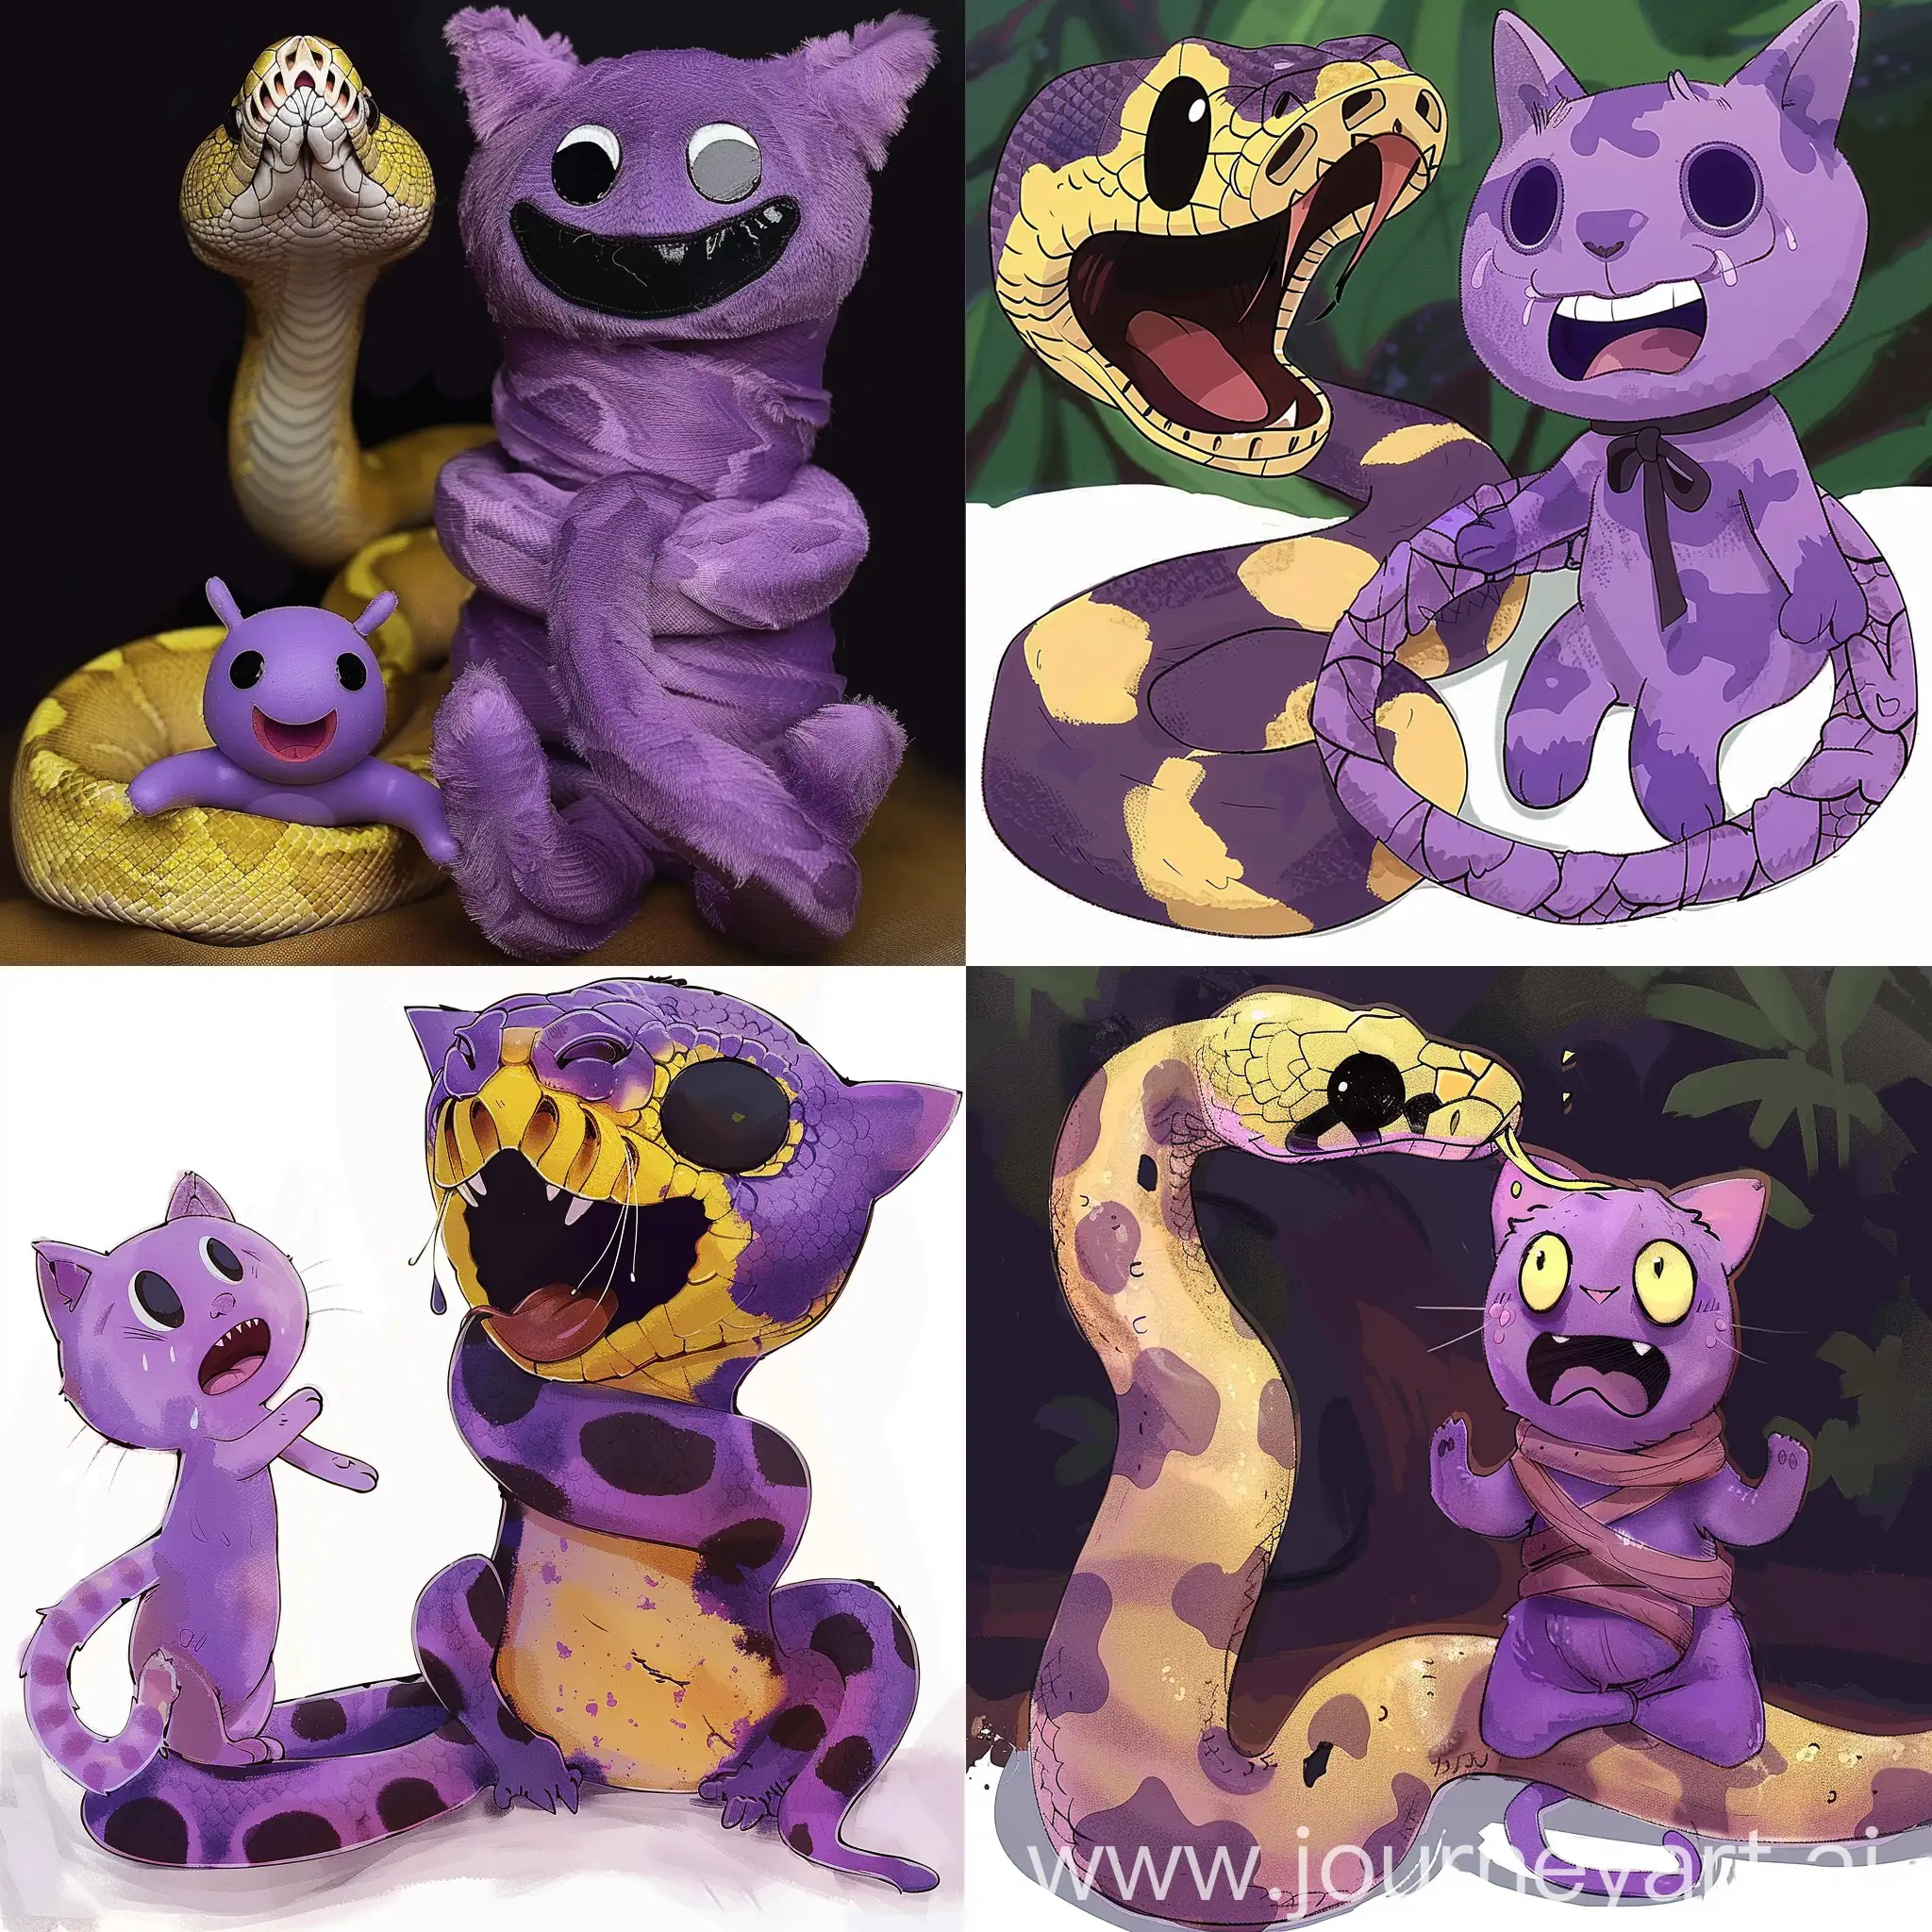 a snake python with an aggressive expression attacks and wraps a catnap smiling critter from Poppy Playtime chapter 3 that is purple and crying from suffocation